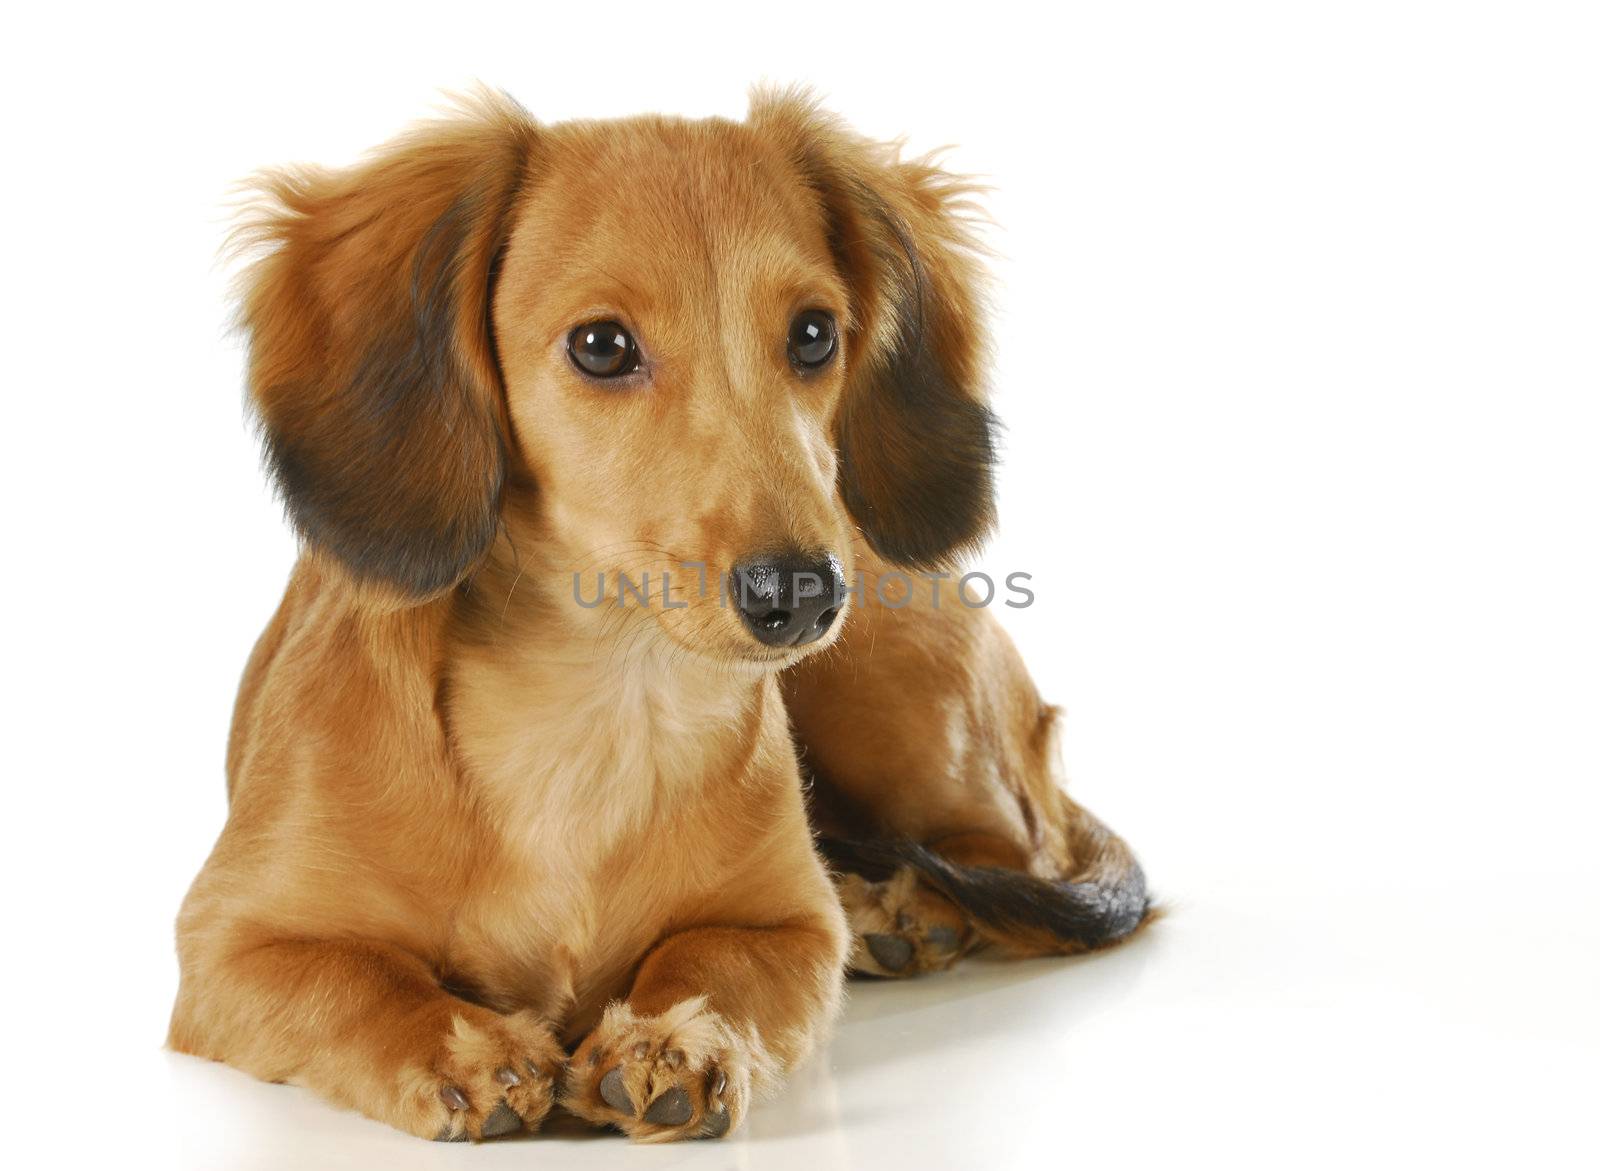 long haired dachshund puppy laying down isolated on white background